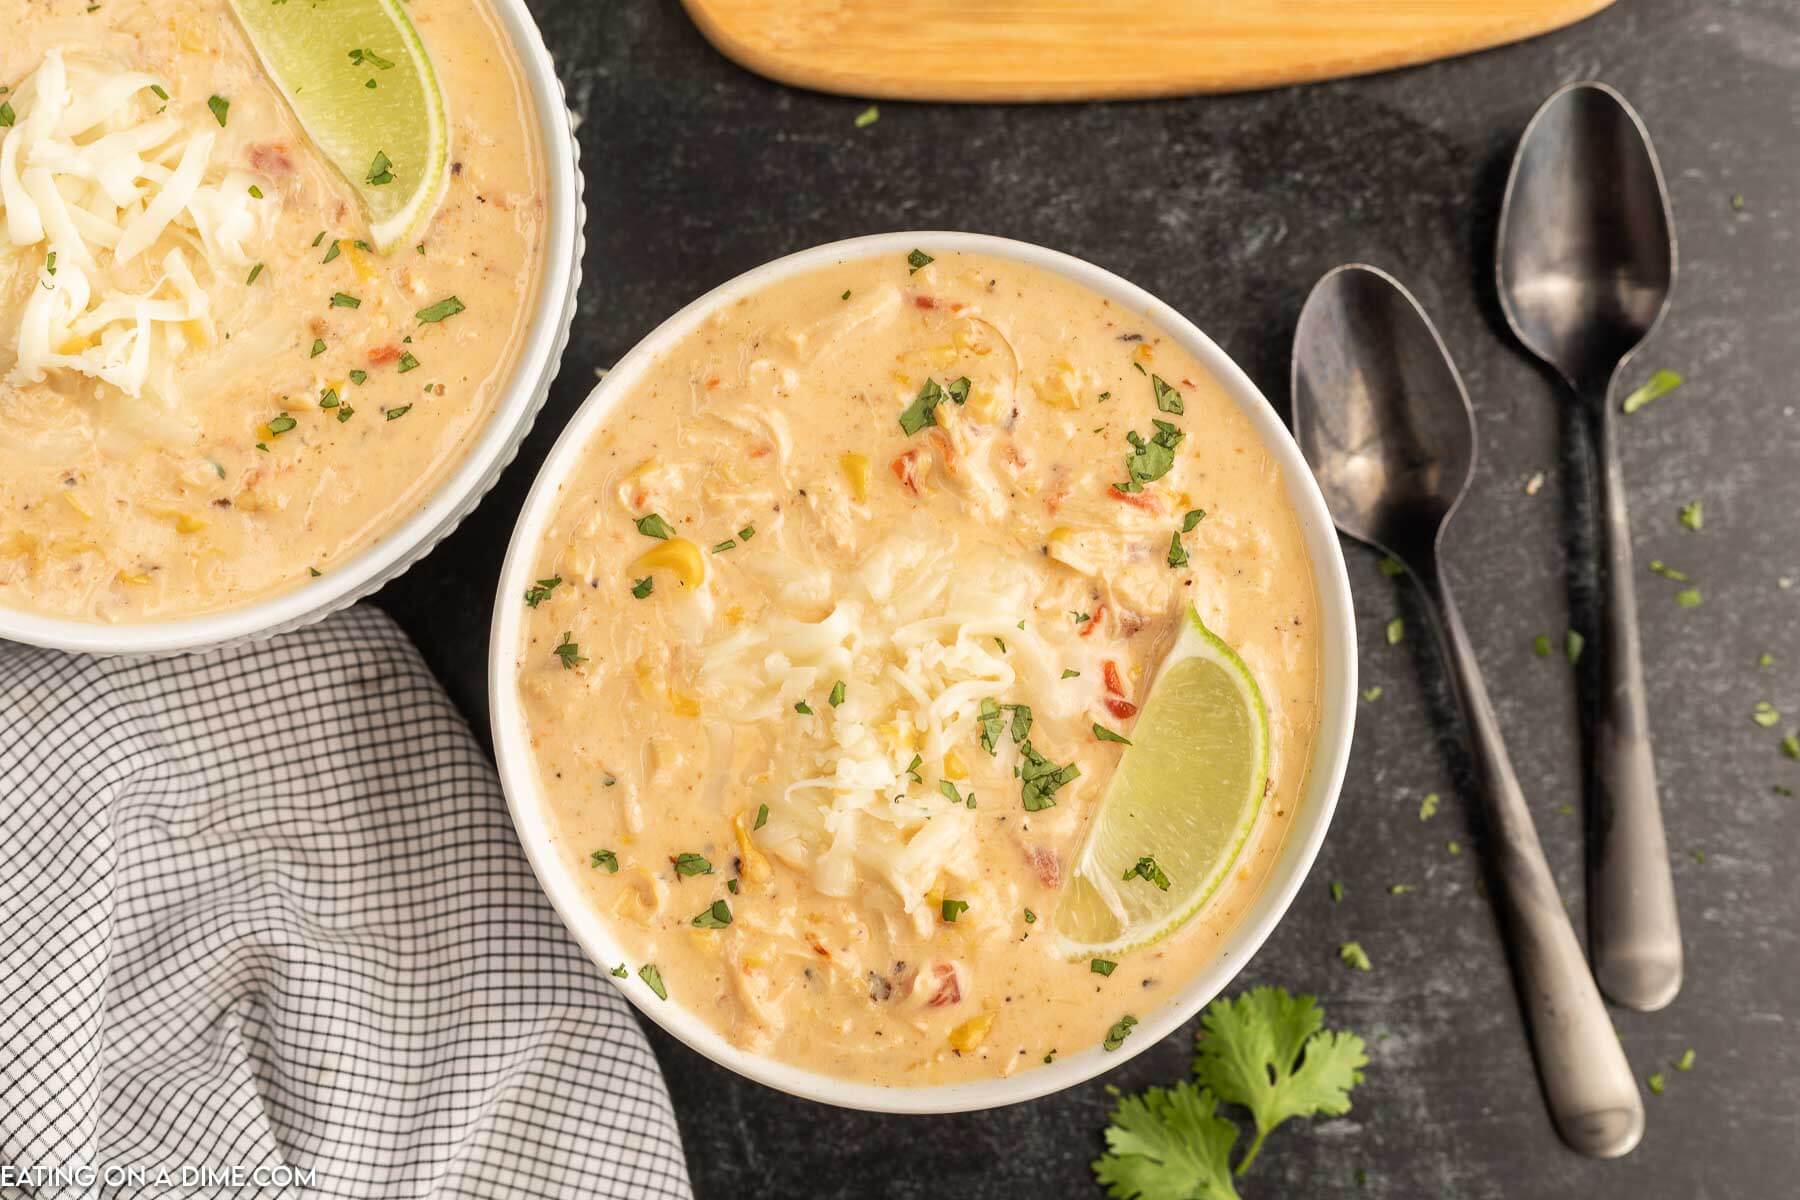 Close up image of Mexican Corn Chowder in a white bowl with a spoon